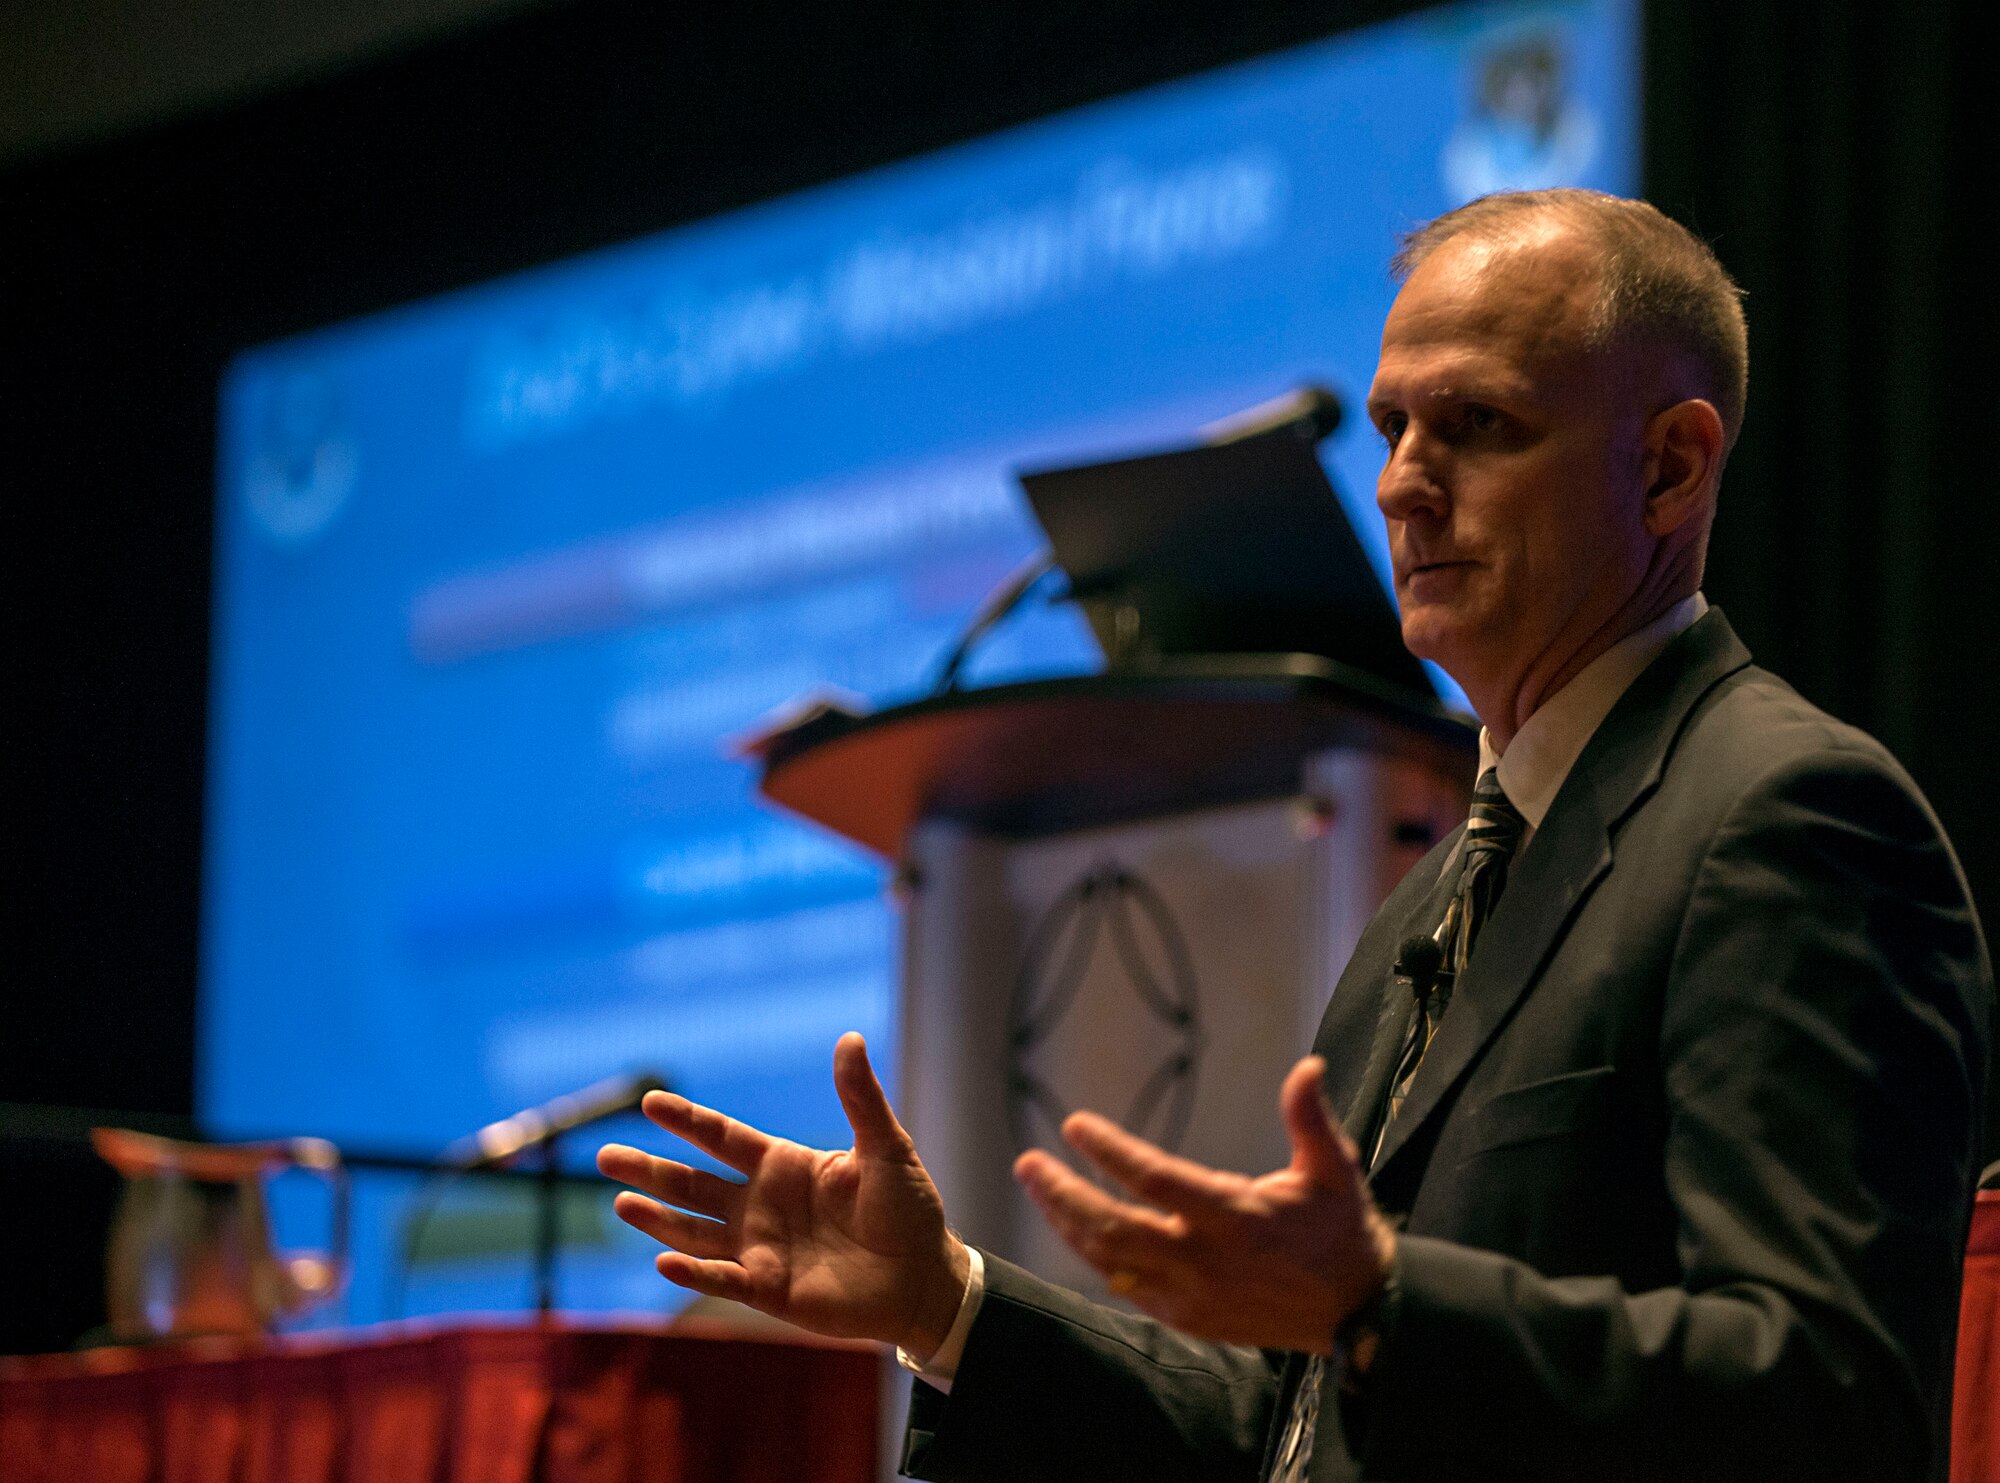 Robert Cole, Air Forces Cyber executive director, speaks to attendees at the CyberTexas Conference in San Antonio, Texas, Aug. 14, 2018. The conference was hosted to develop the next generations of cyber professionals. (U.S. Air Force photo by Tech. Sgt. R.J. Biermann)